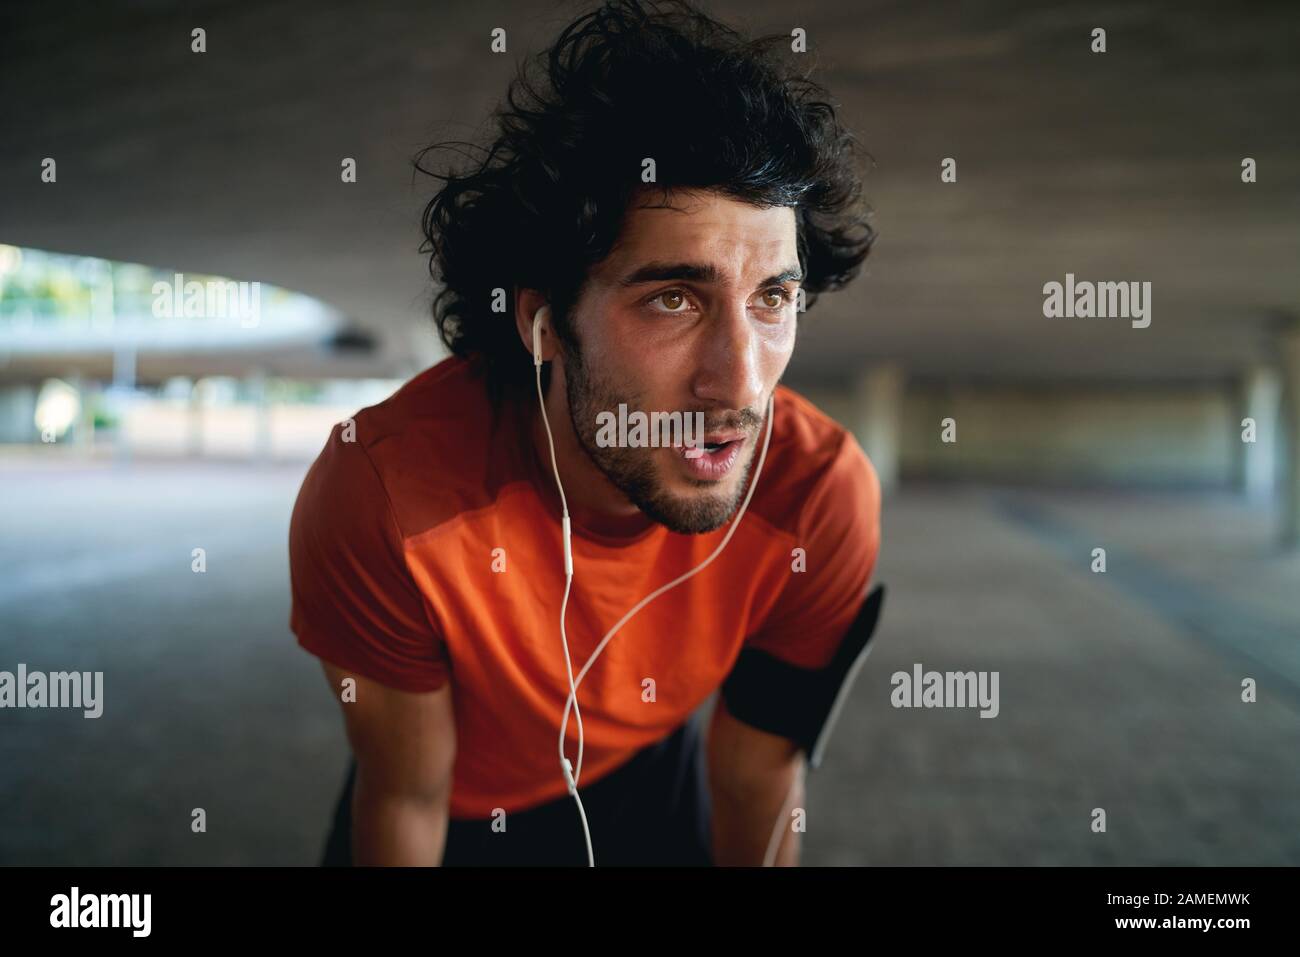 Close up of a Tired man runner with earphone in his ears taking a rest after running on city street - new years resolutions Stock Photo